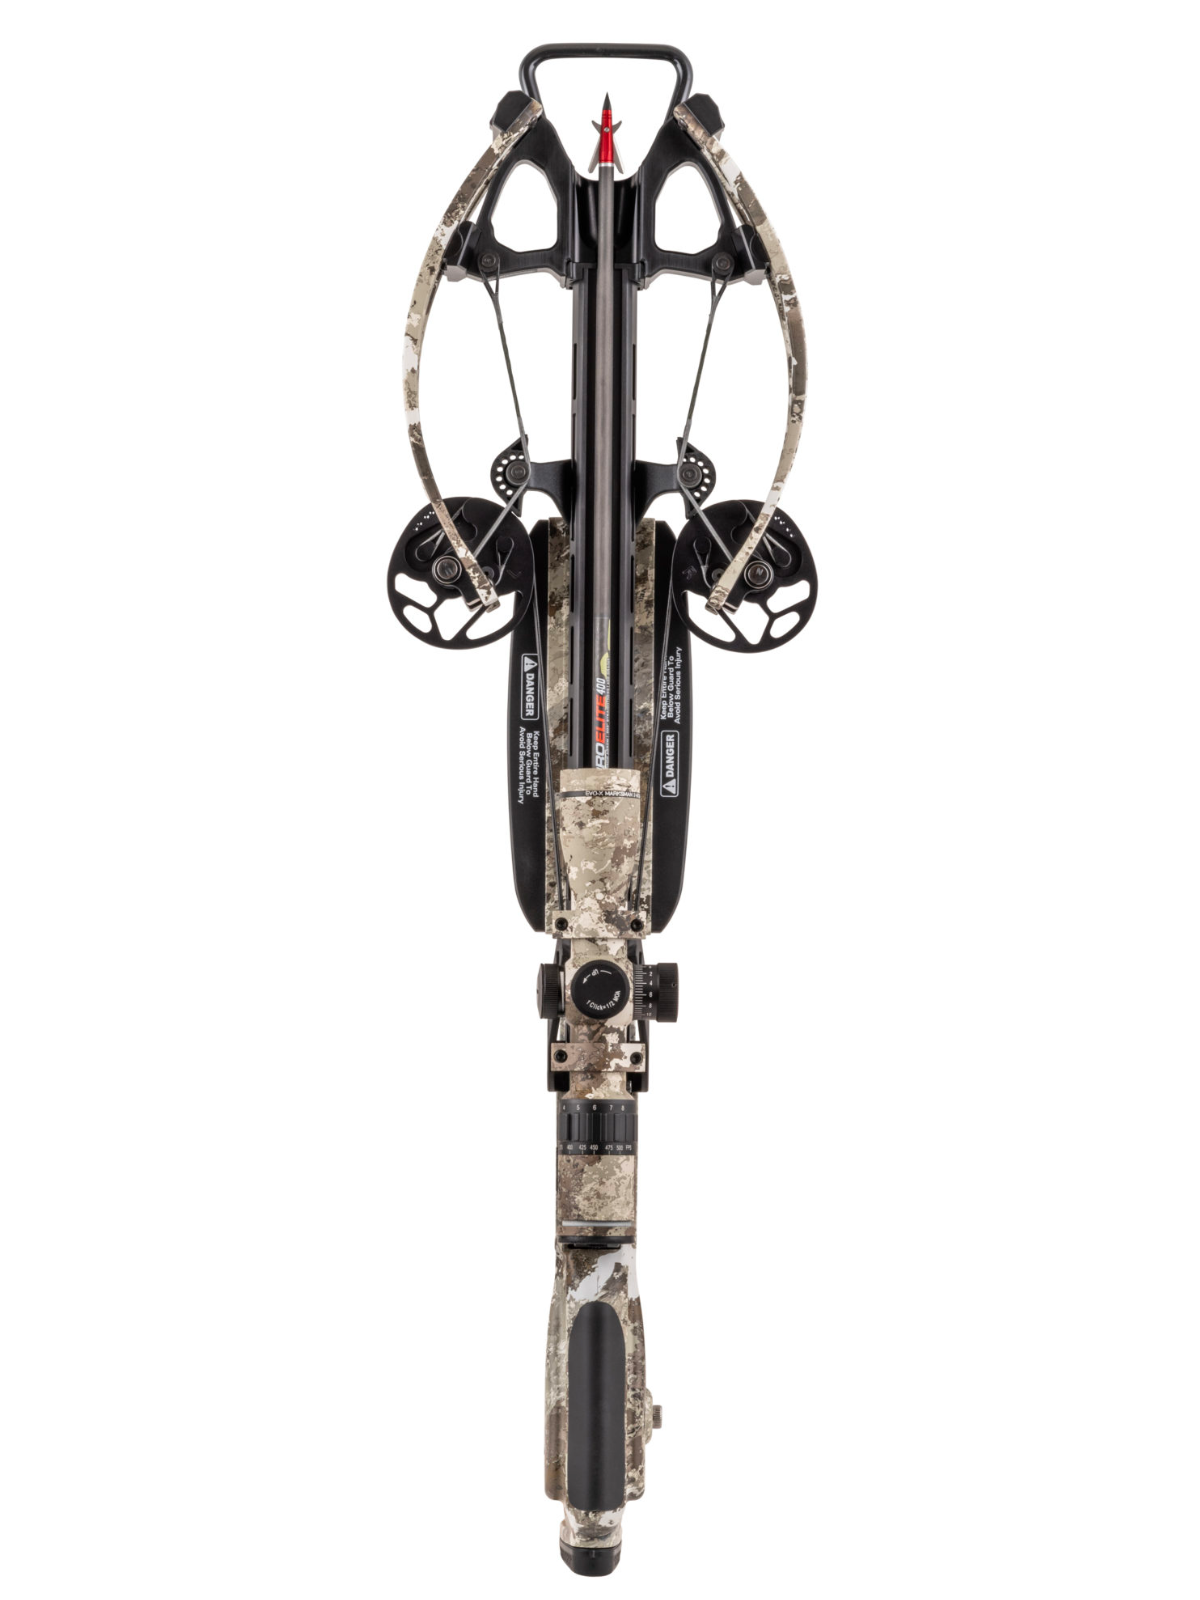 TenPoint Stealth 450 ACUslide Evo-X Elite Compound Crossbow Package